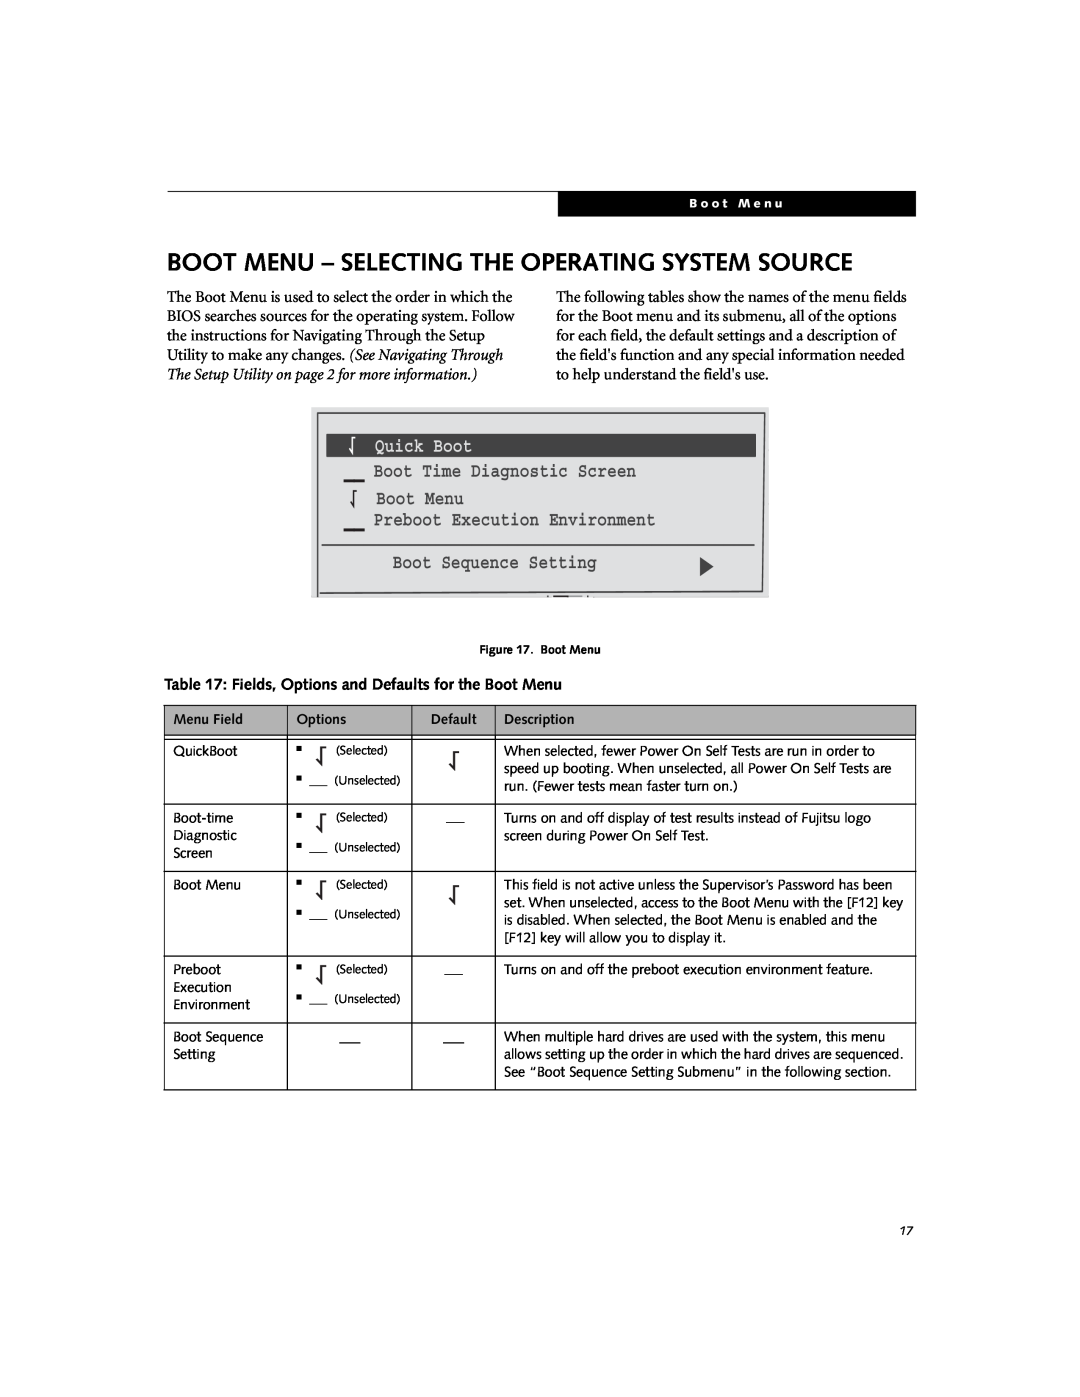 Fujitsu N6220 Boot Menu - Selecting The Operating System Source, Fields, Options and Defaults for the Boot Menu, 040M9AT00 